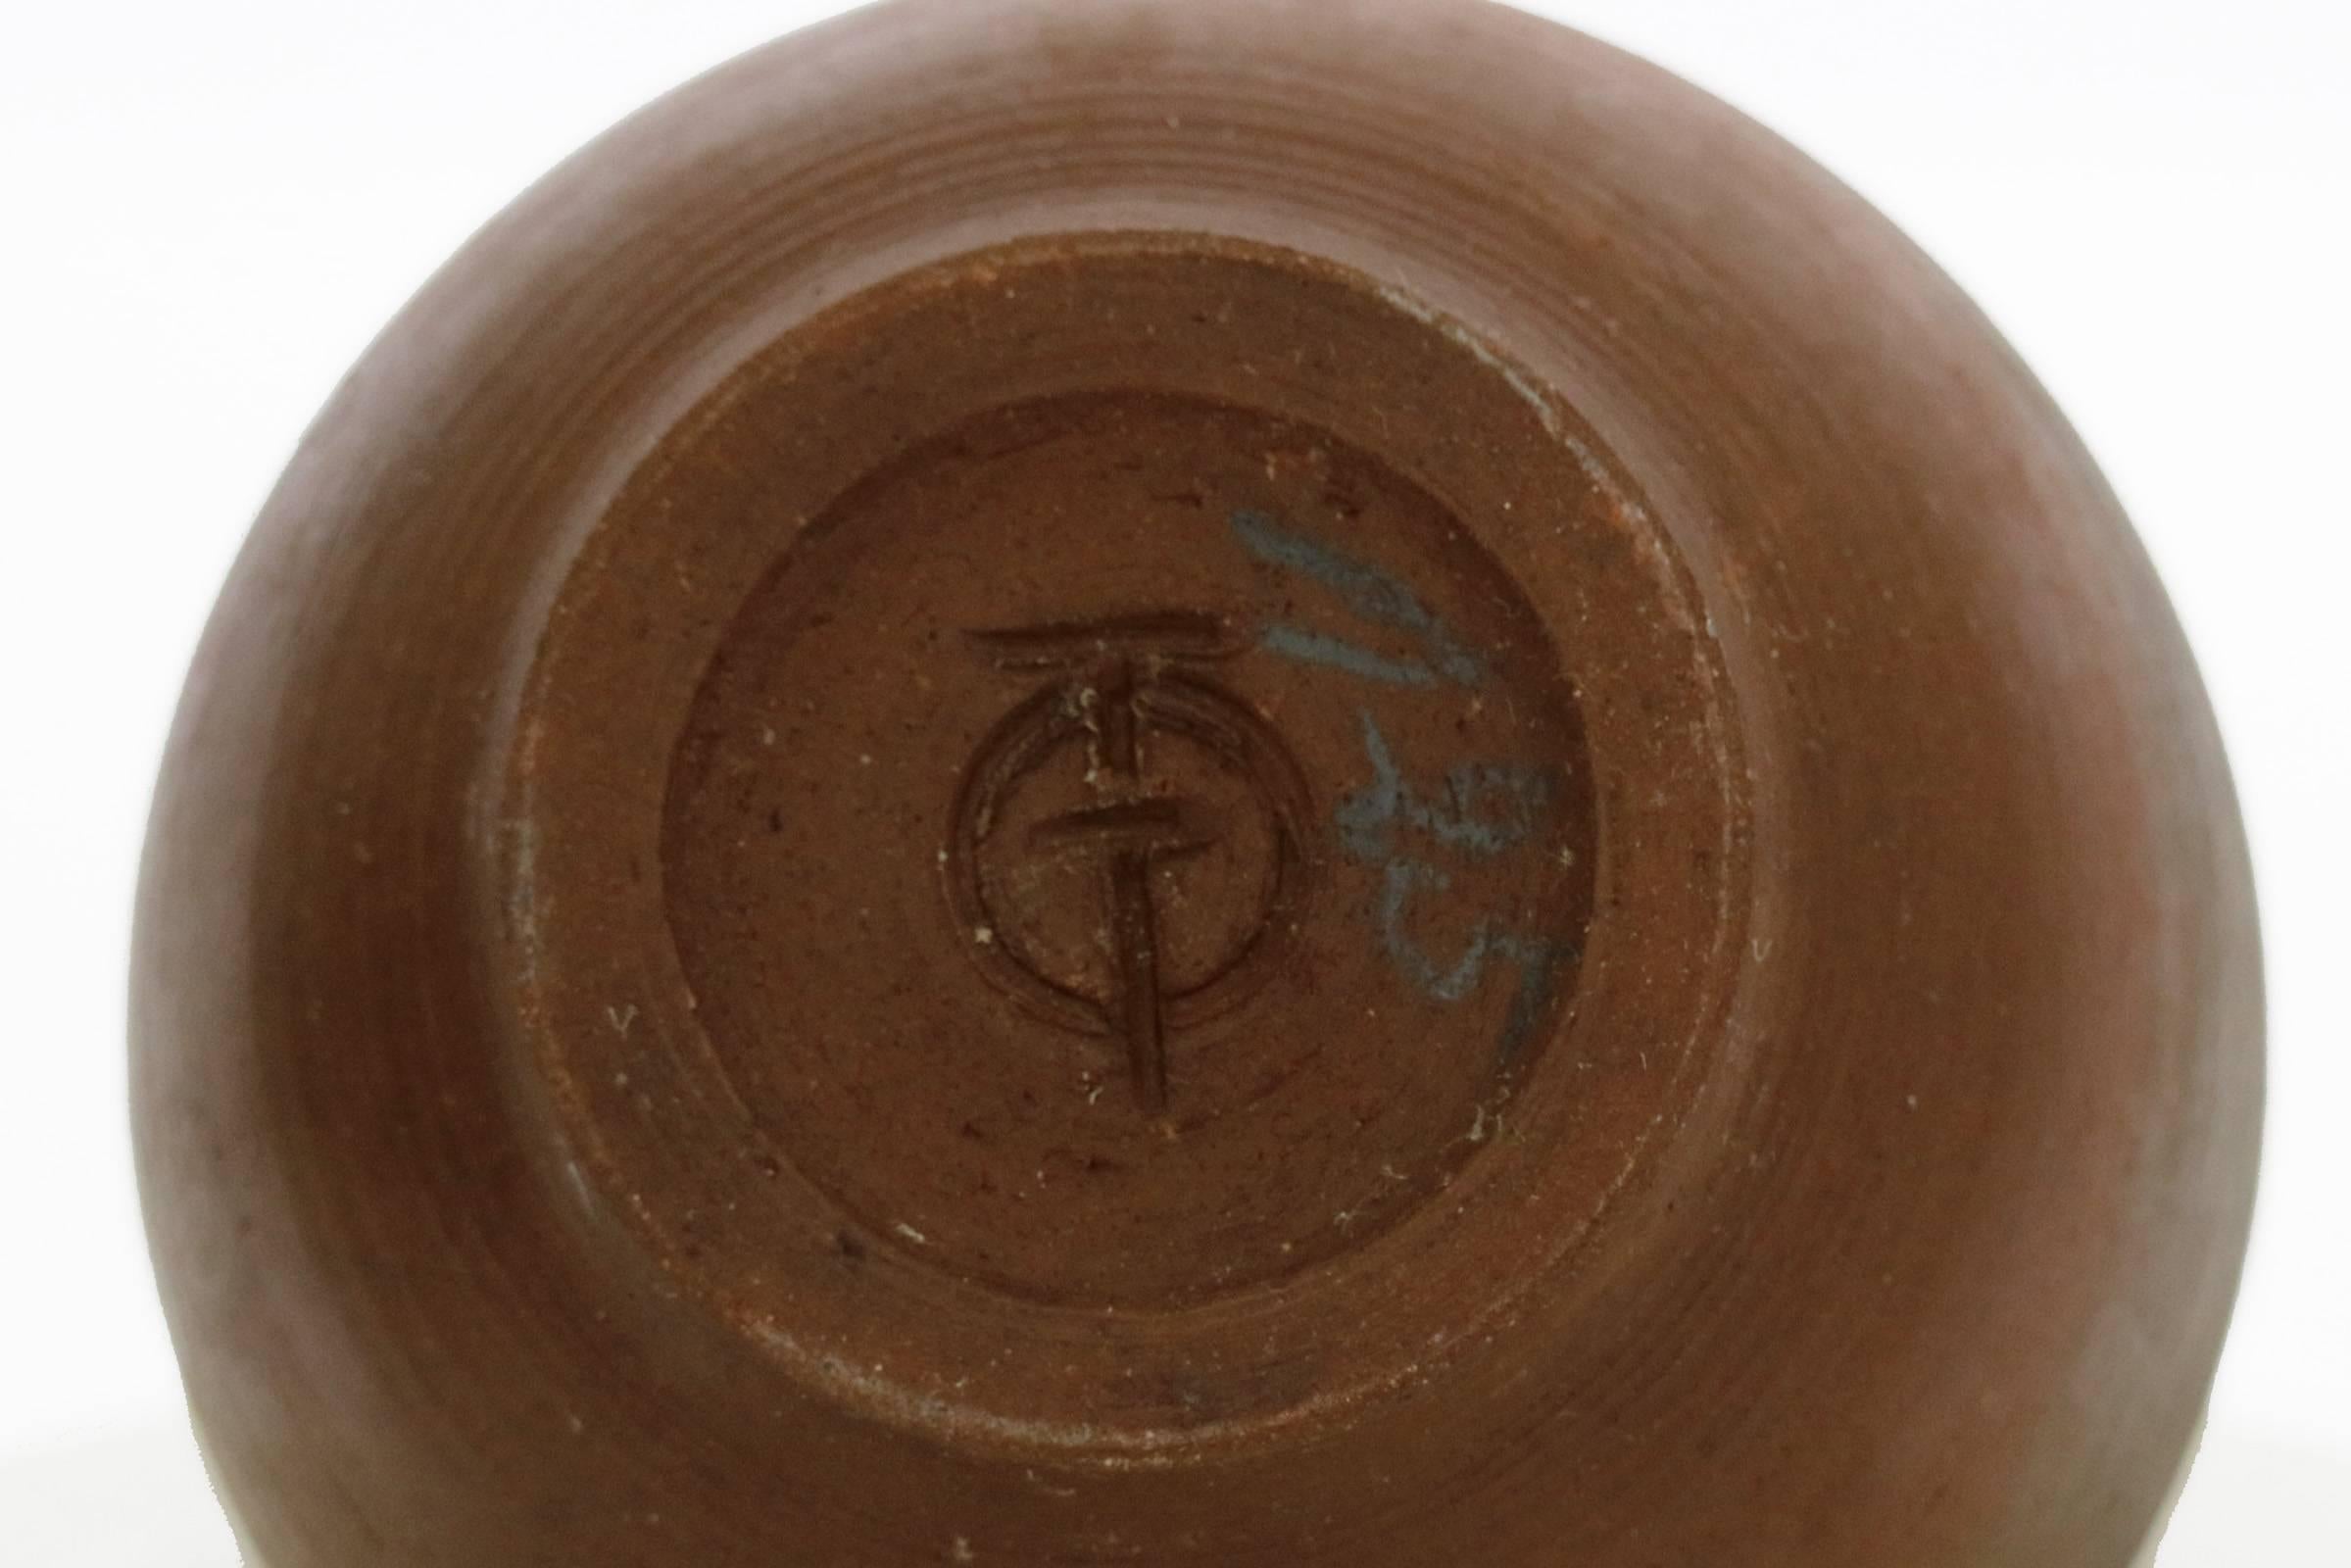 Painted ceramic vase with unknown marking on underside. 